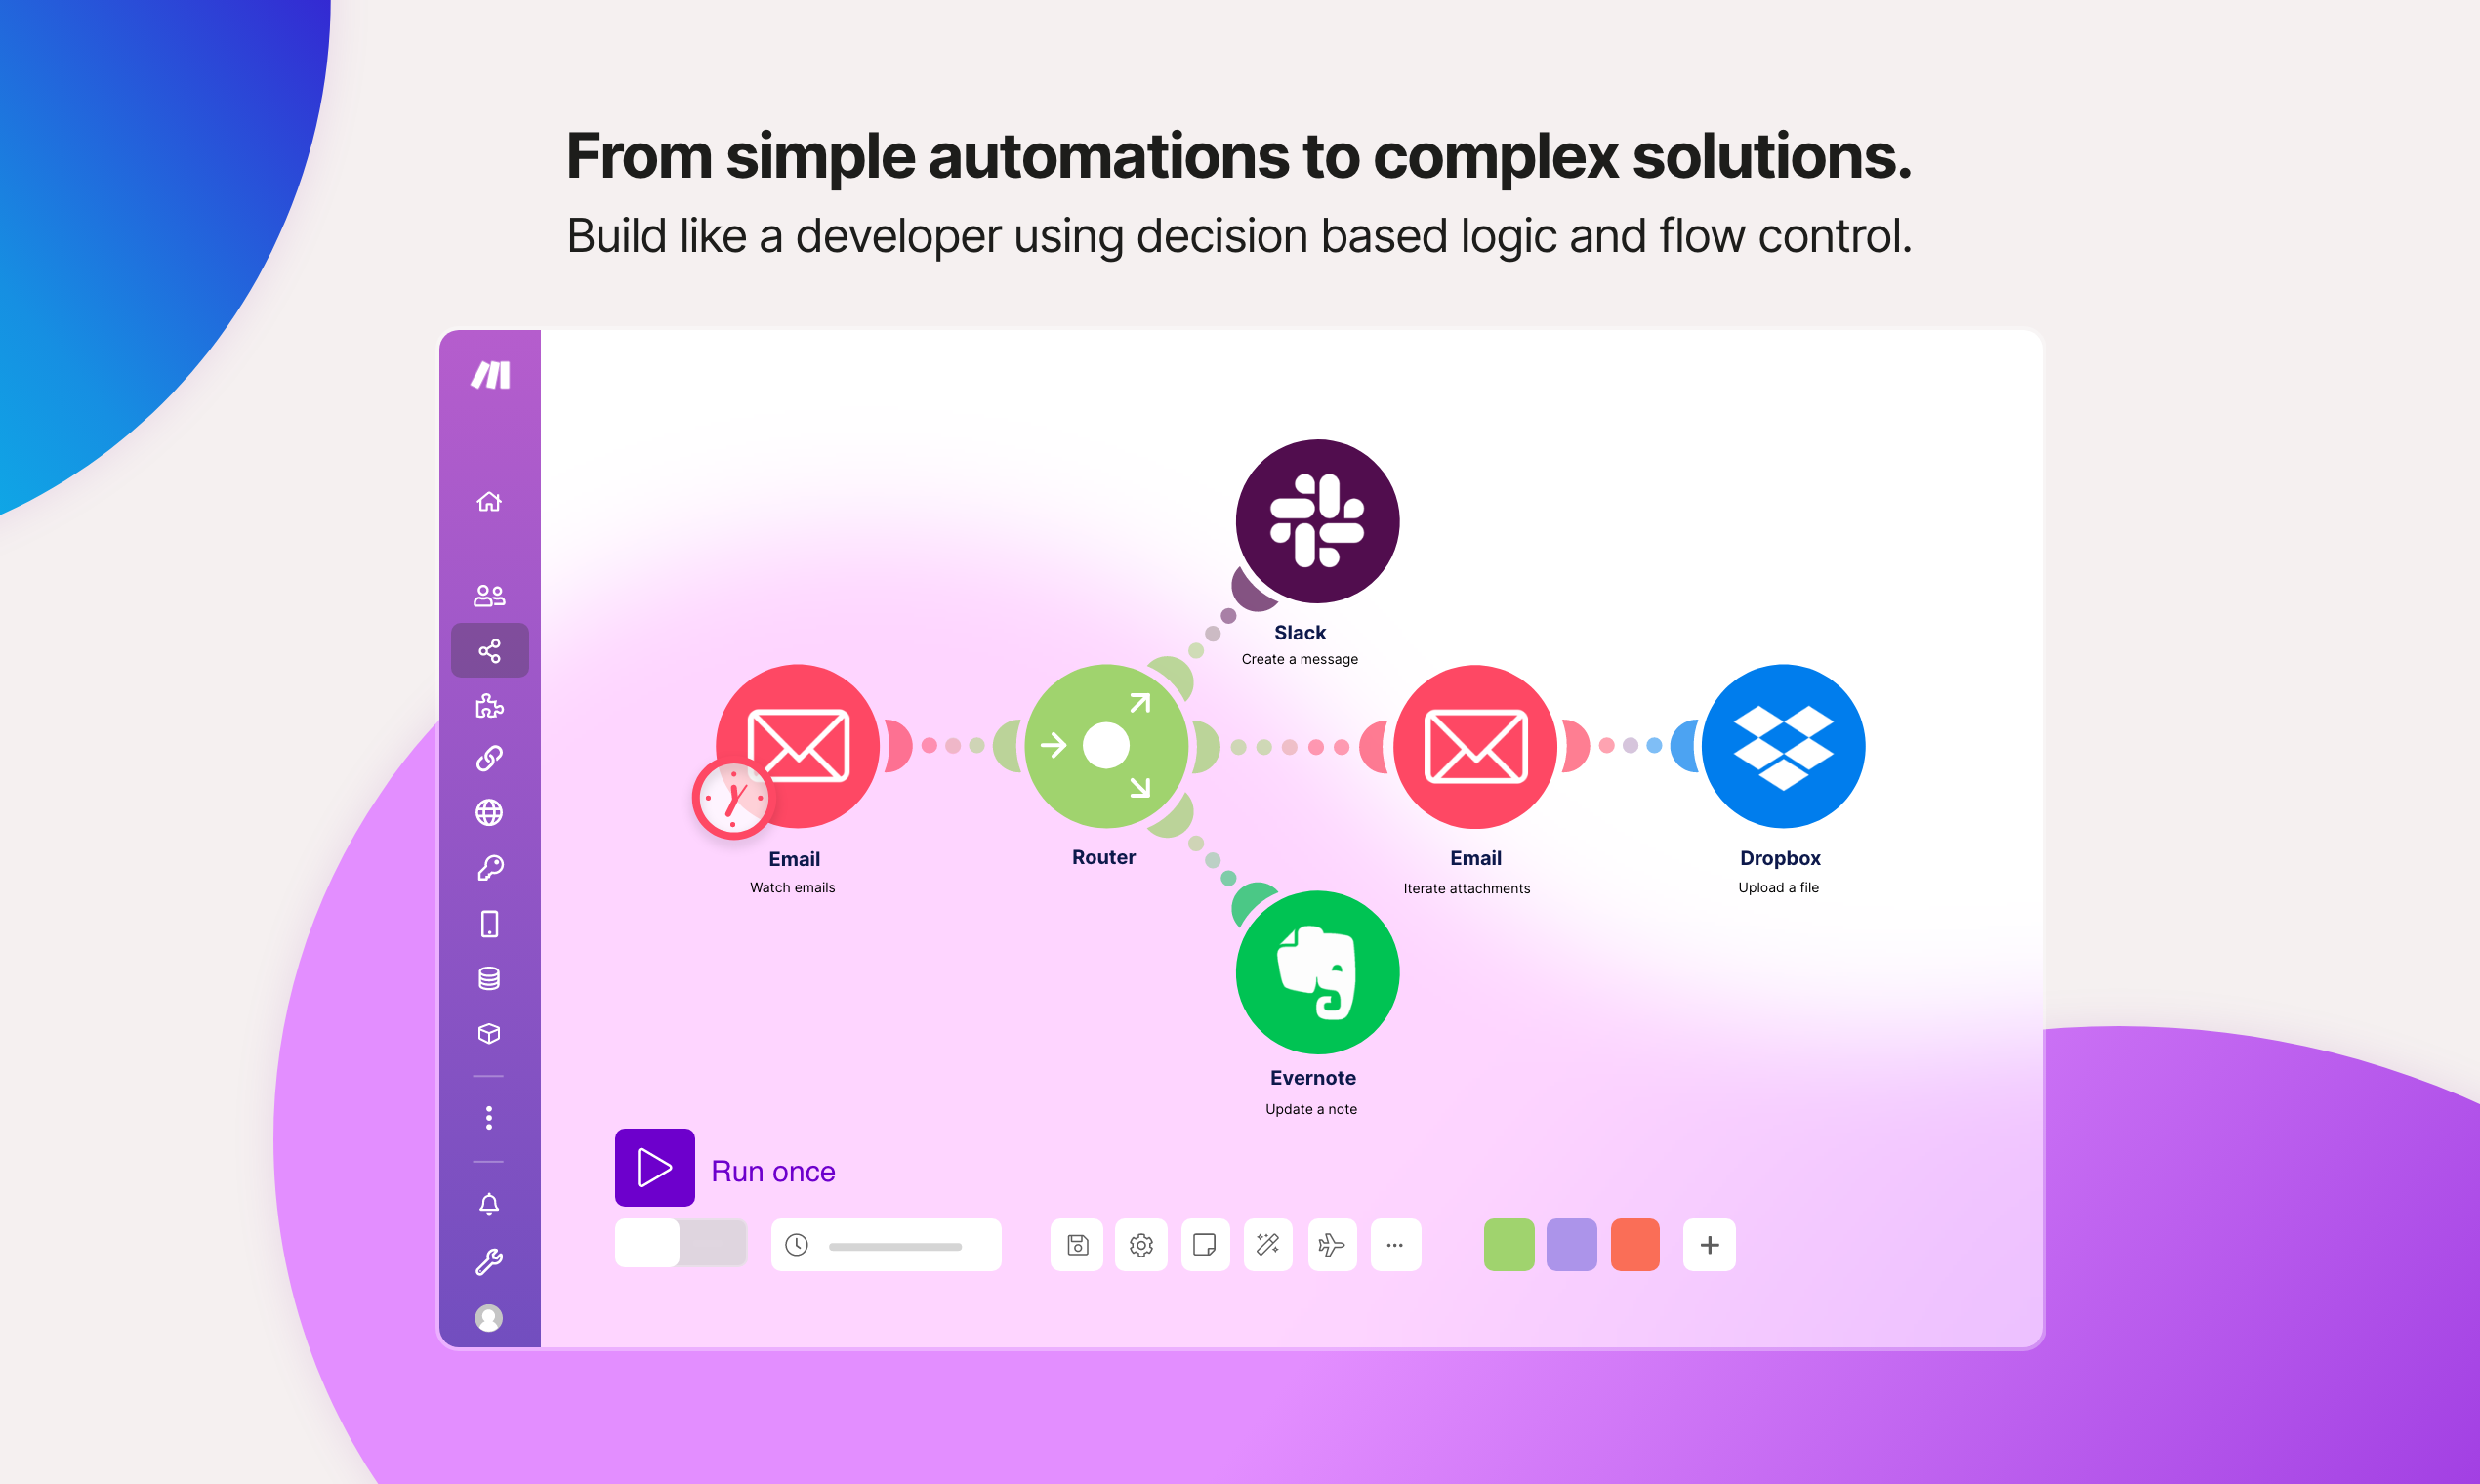 From simple automations to complex solutions.